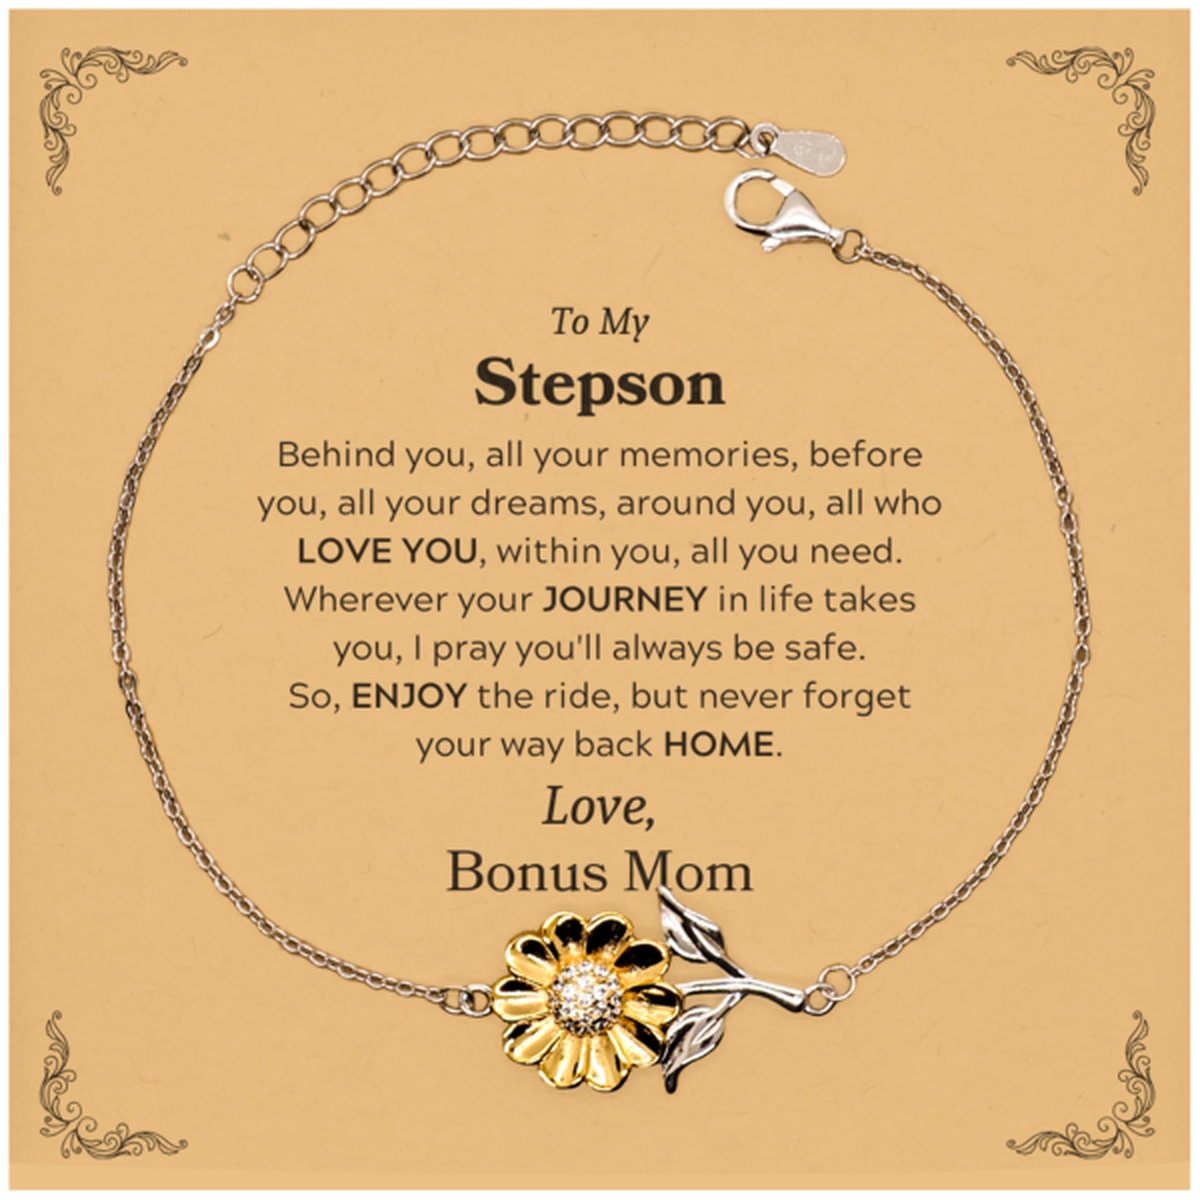 To My Stepson Graduation Gifts from Bonus Mom, Stepson Sunflower Bracelet Christmas Birthday Gifts for Stepson Behind you, all your memories, before you, all your dreams. Love, Bonus Mom